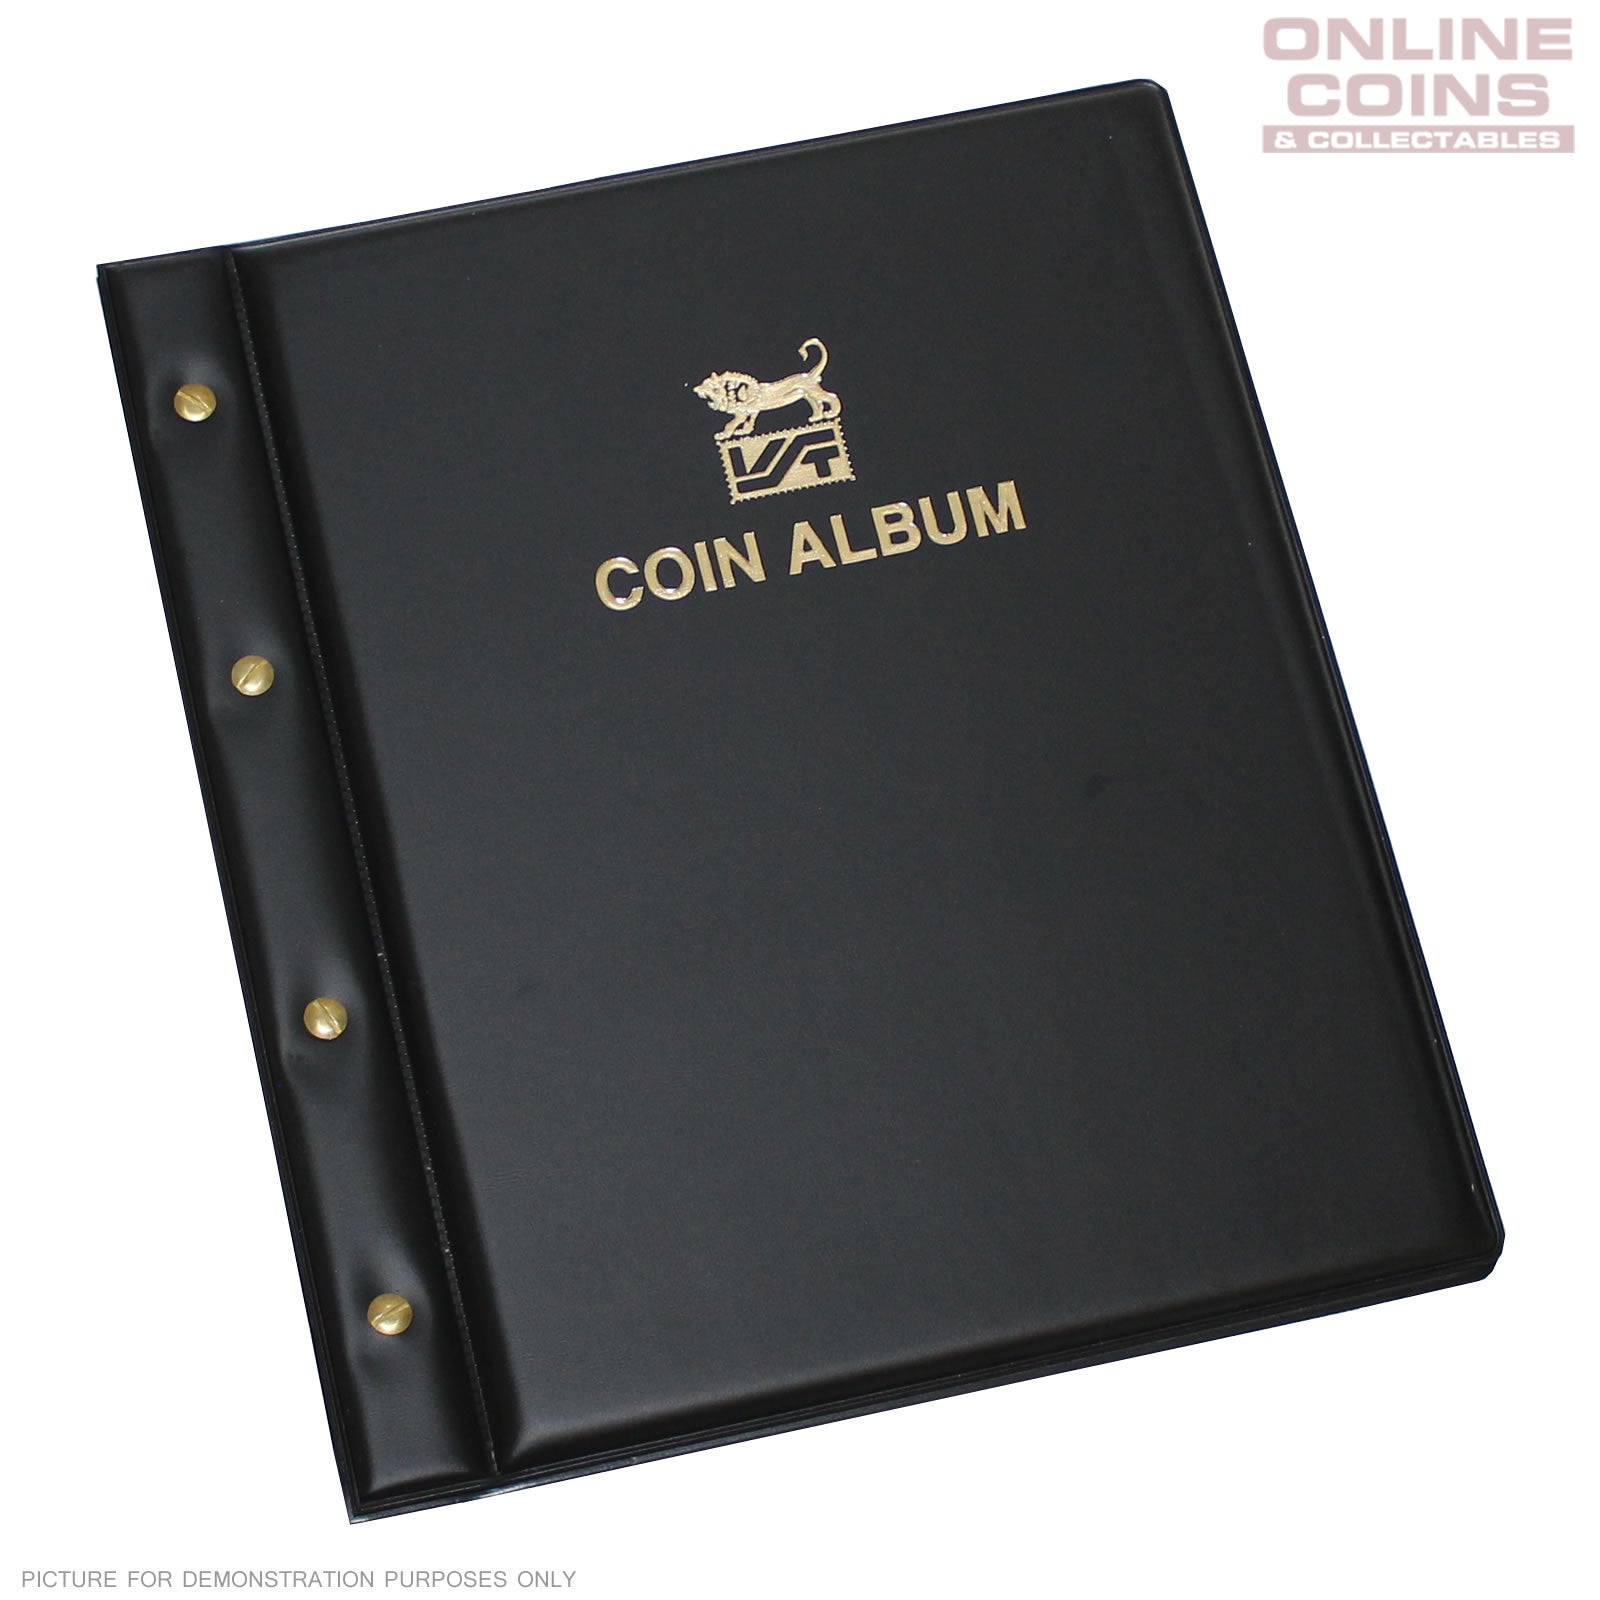 VST Coin Album Padded leatherette Cover Including 6 Coin Album Pages - BLACK